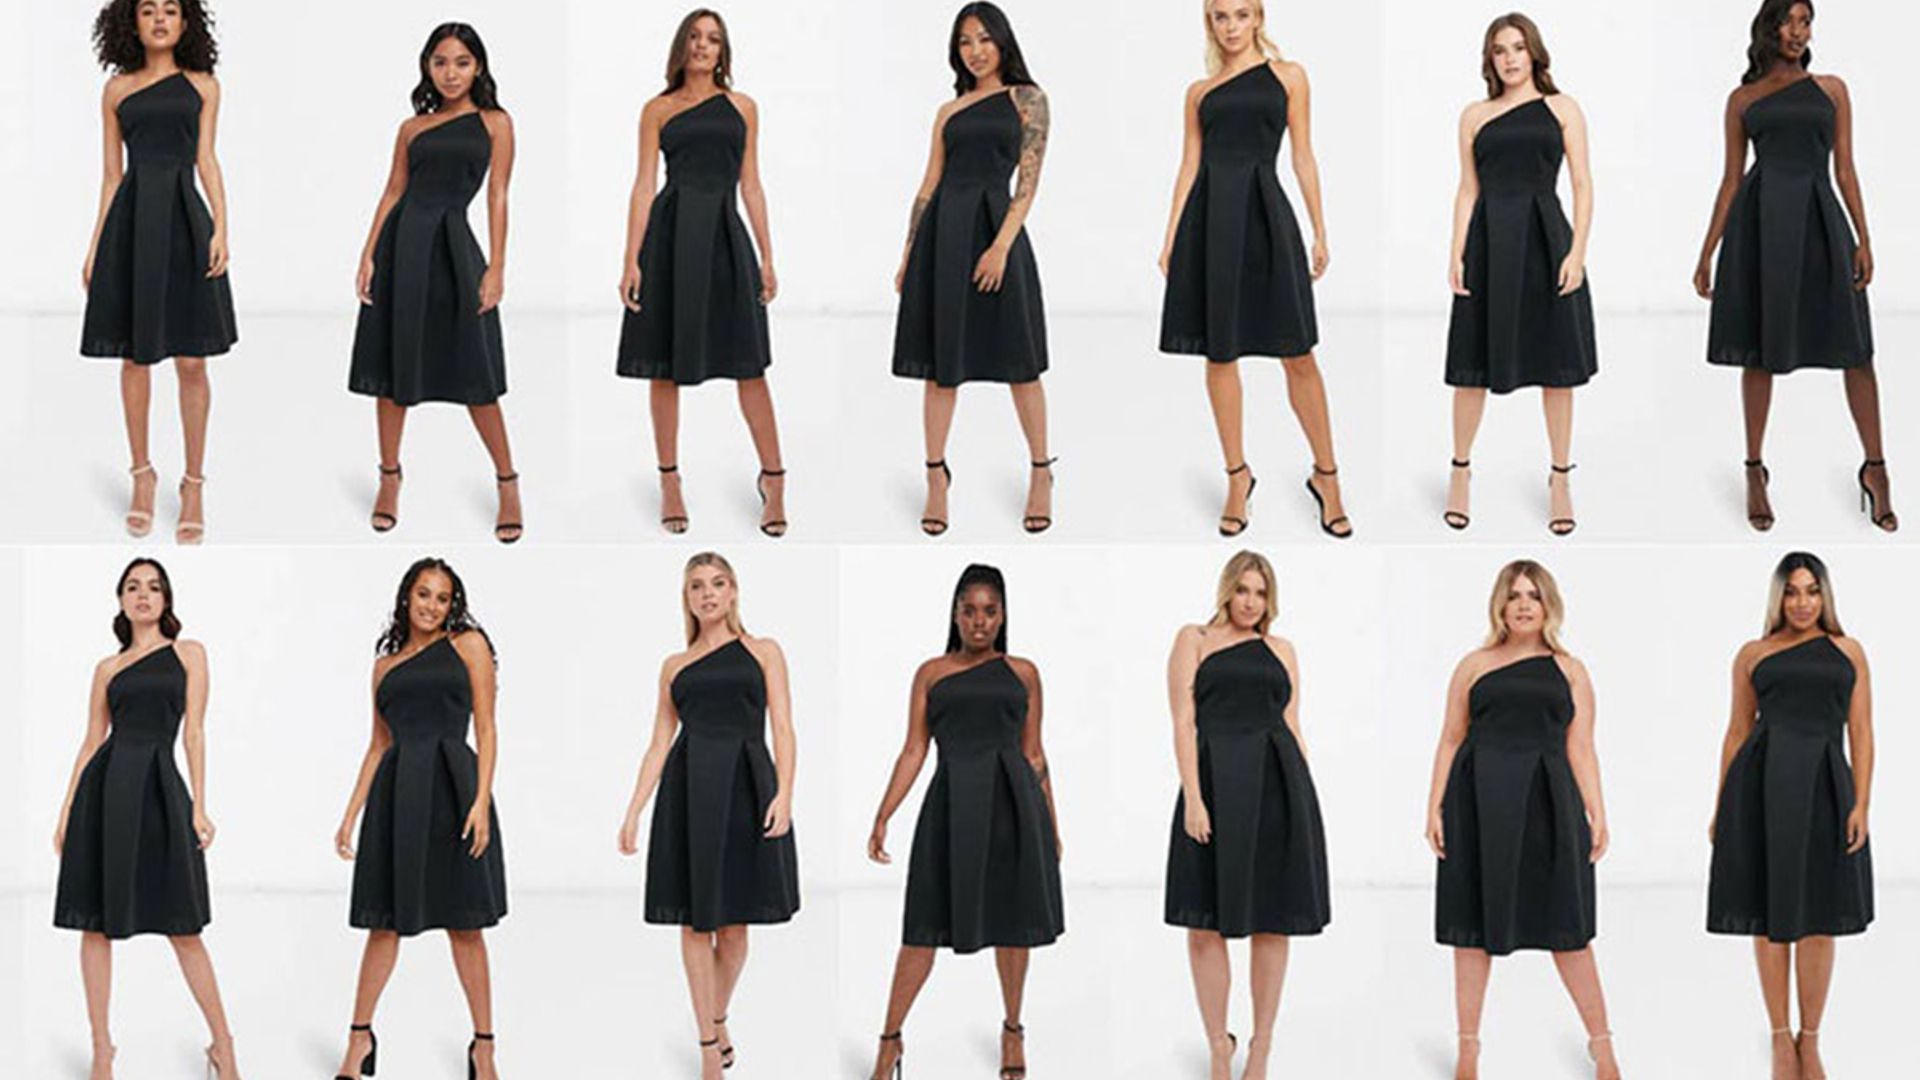 ASOS launches exciting online tool that shows clothes on different body types